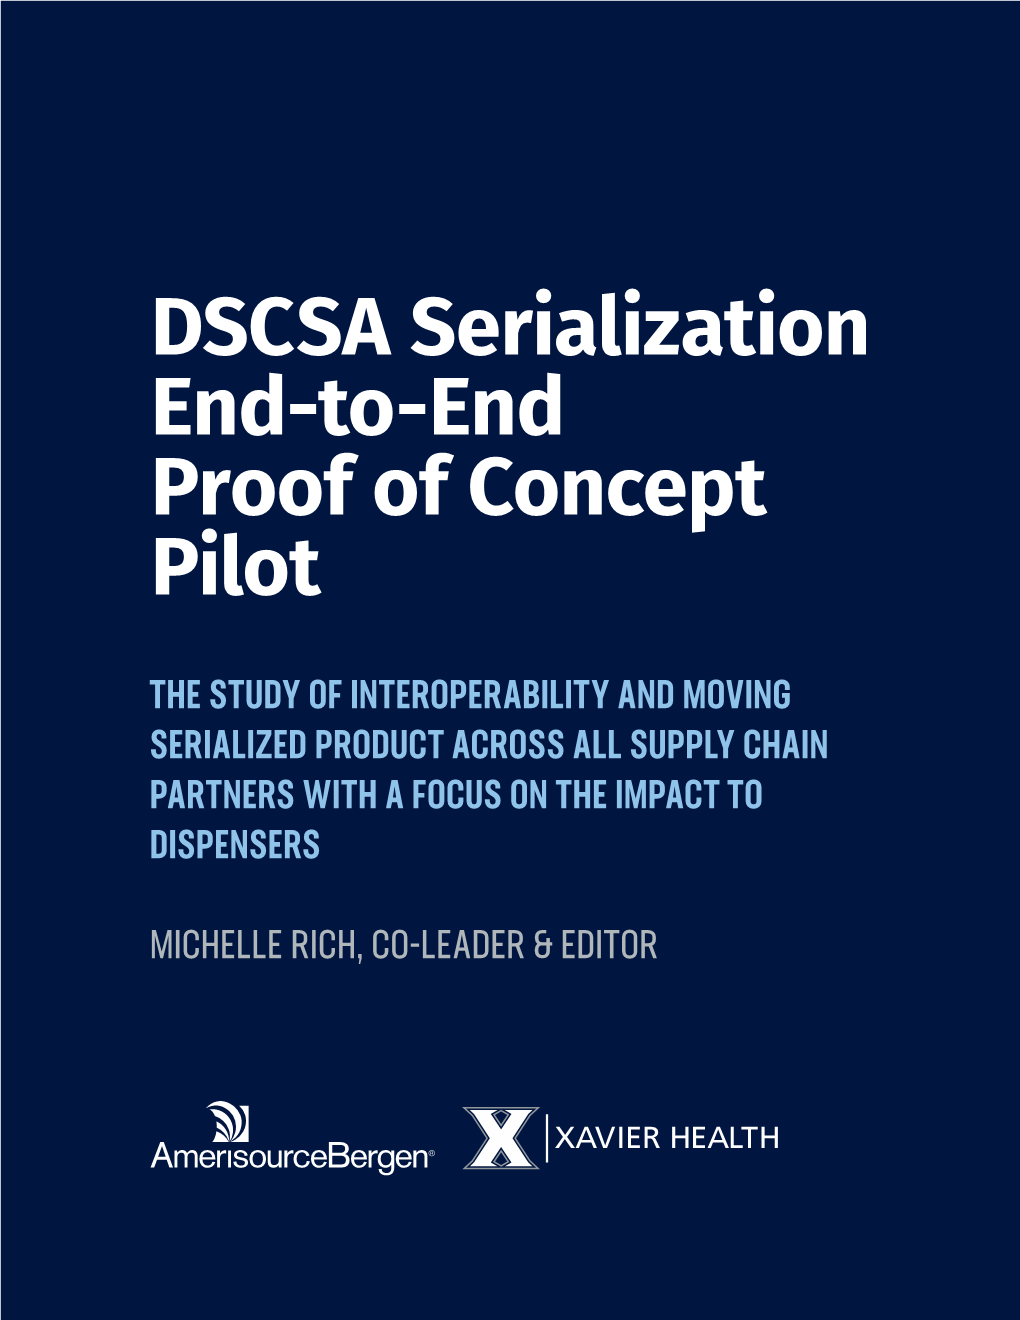 DSCSA Serialization End-To-End Proof of Concept Pilot